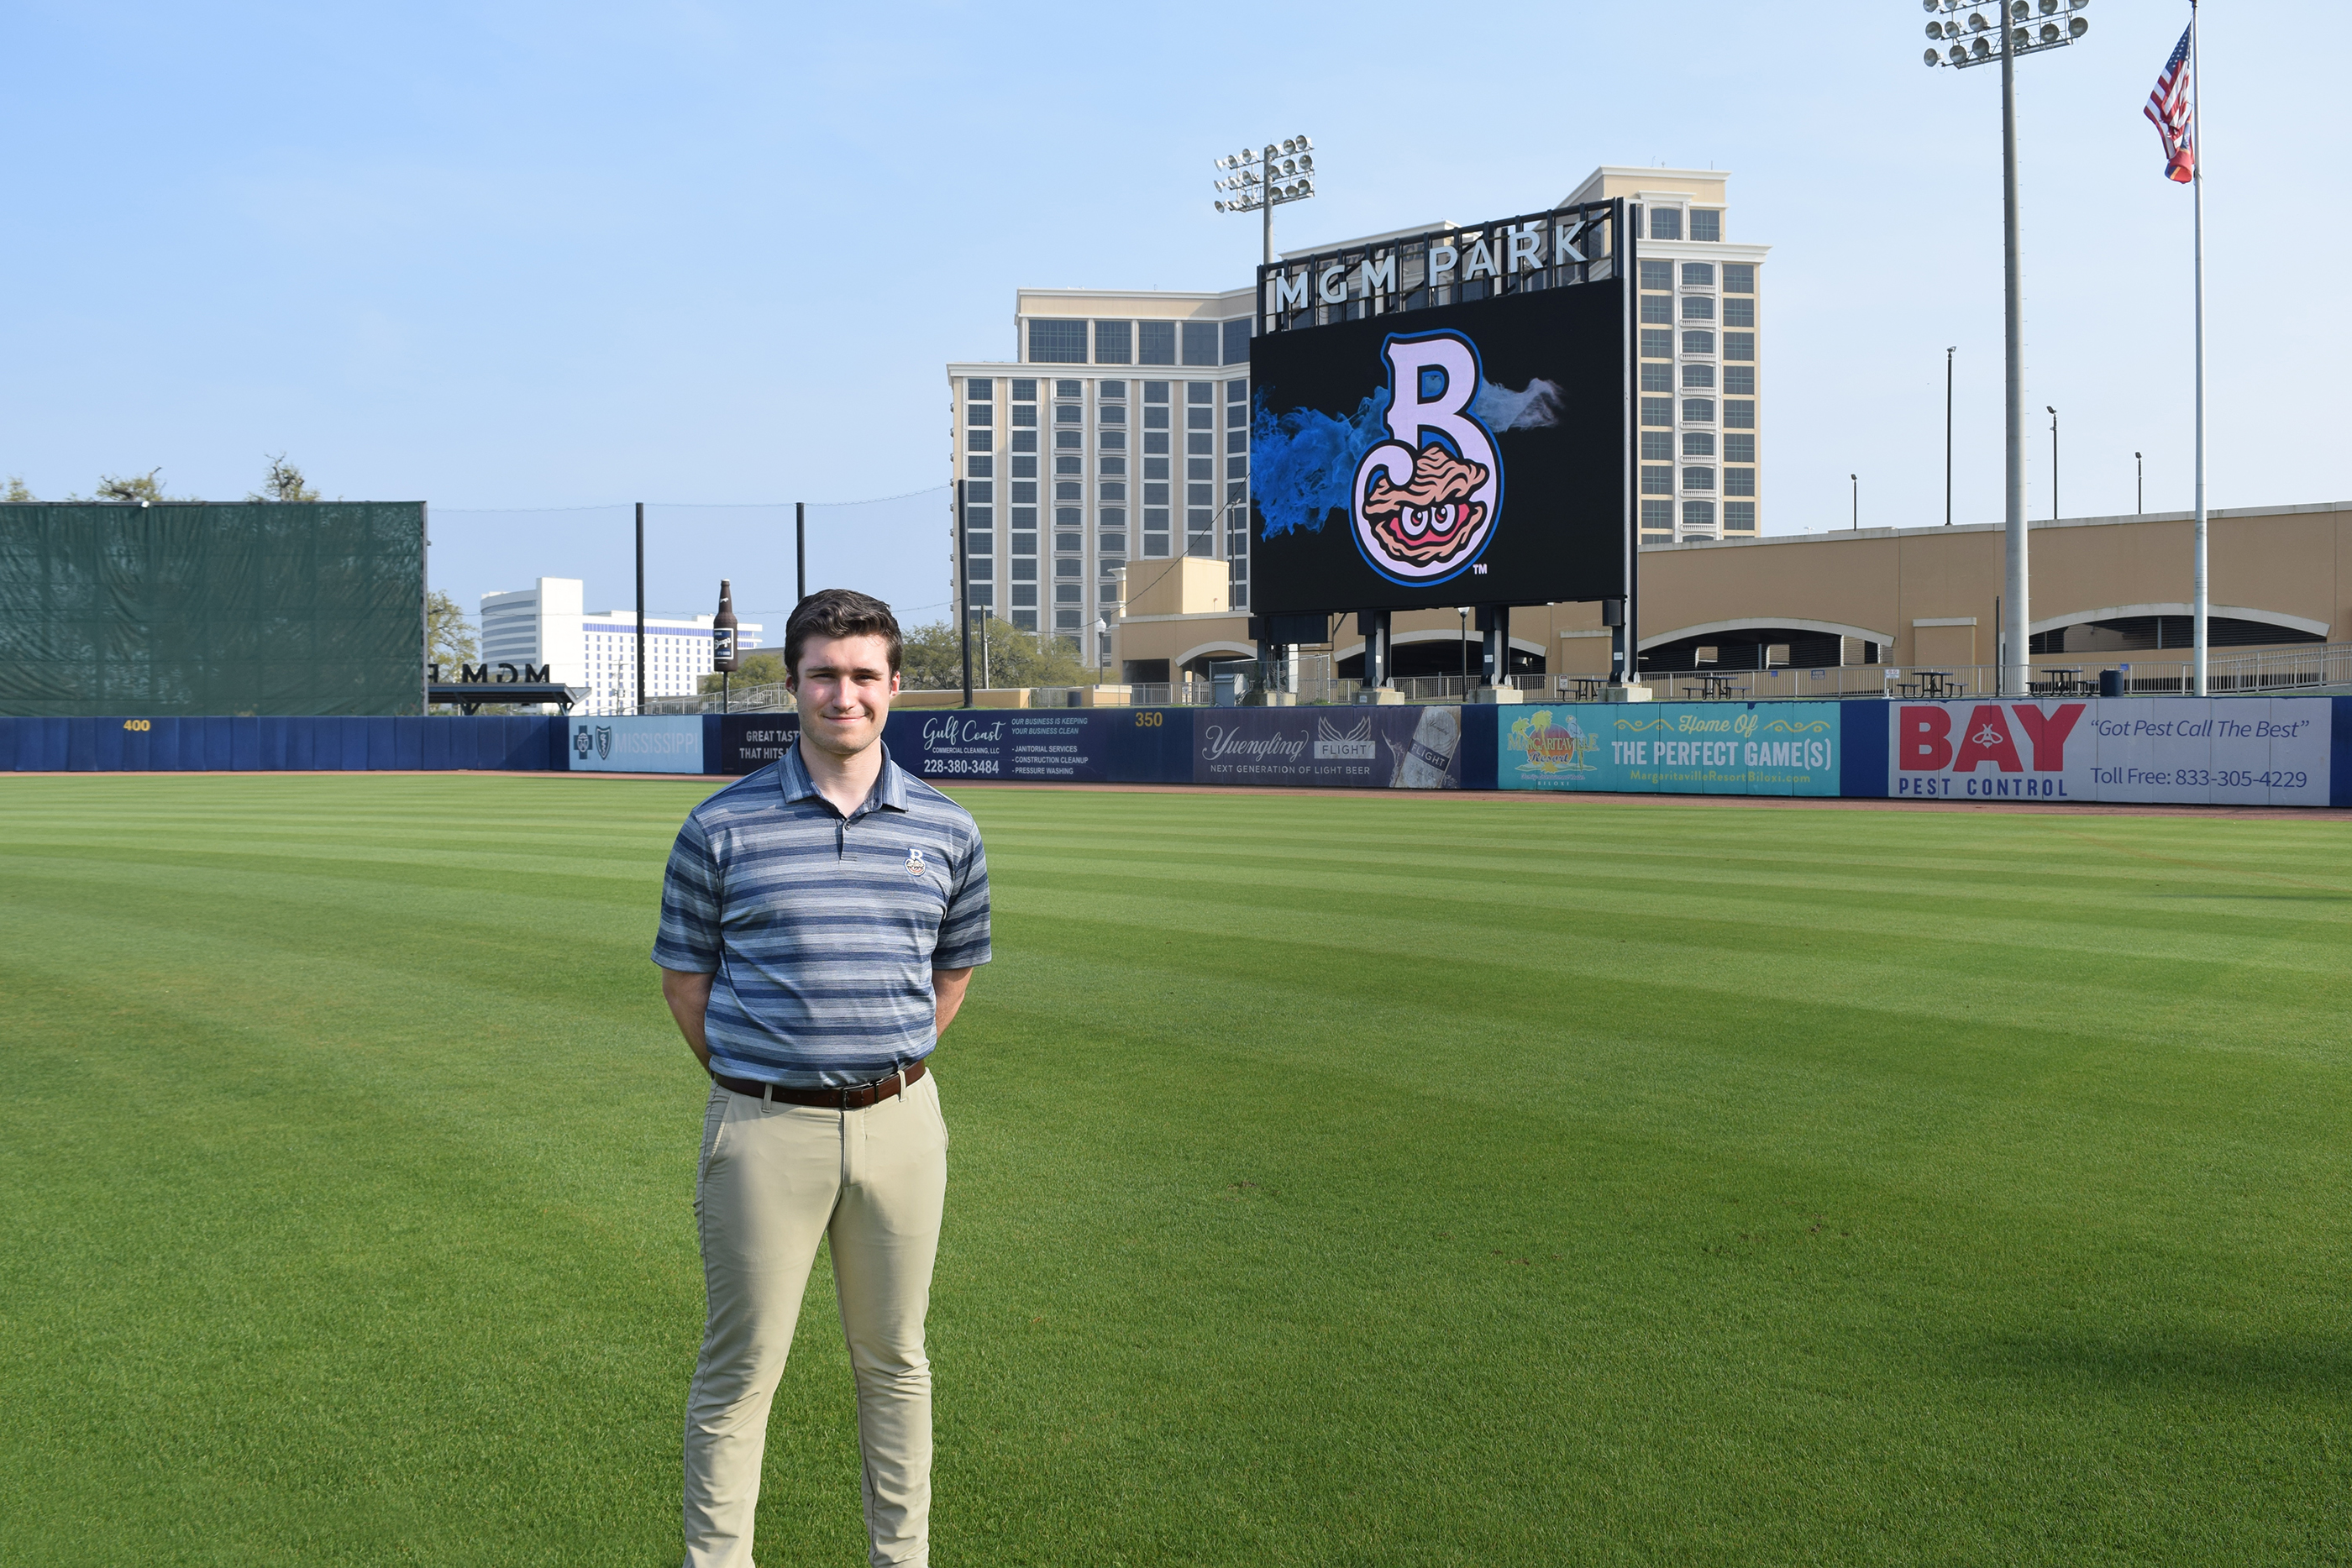 At 22 years old on opening day, Javik Blake ’23 is one of the youngest on-the-mic broadcasters in professional, affiliated baseball.